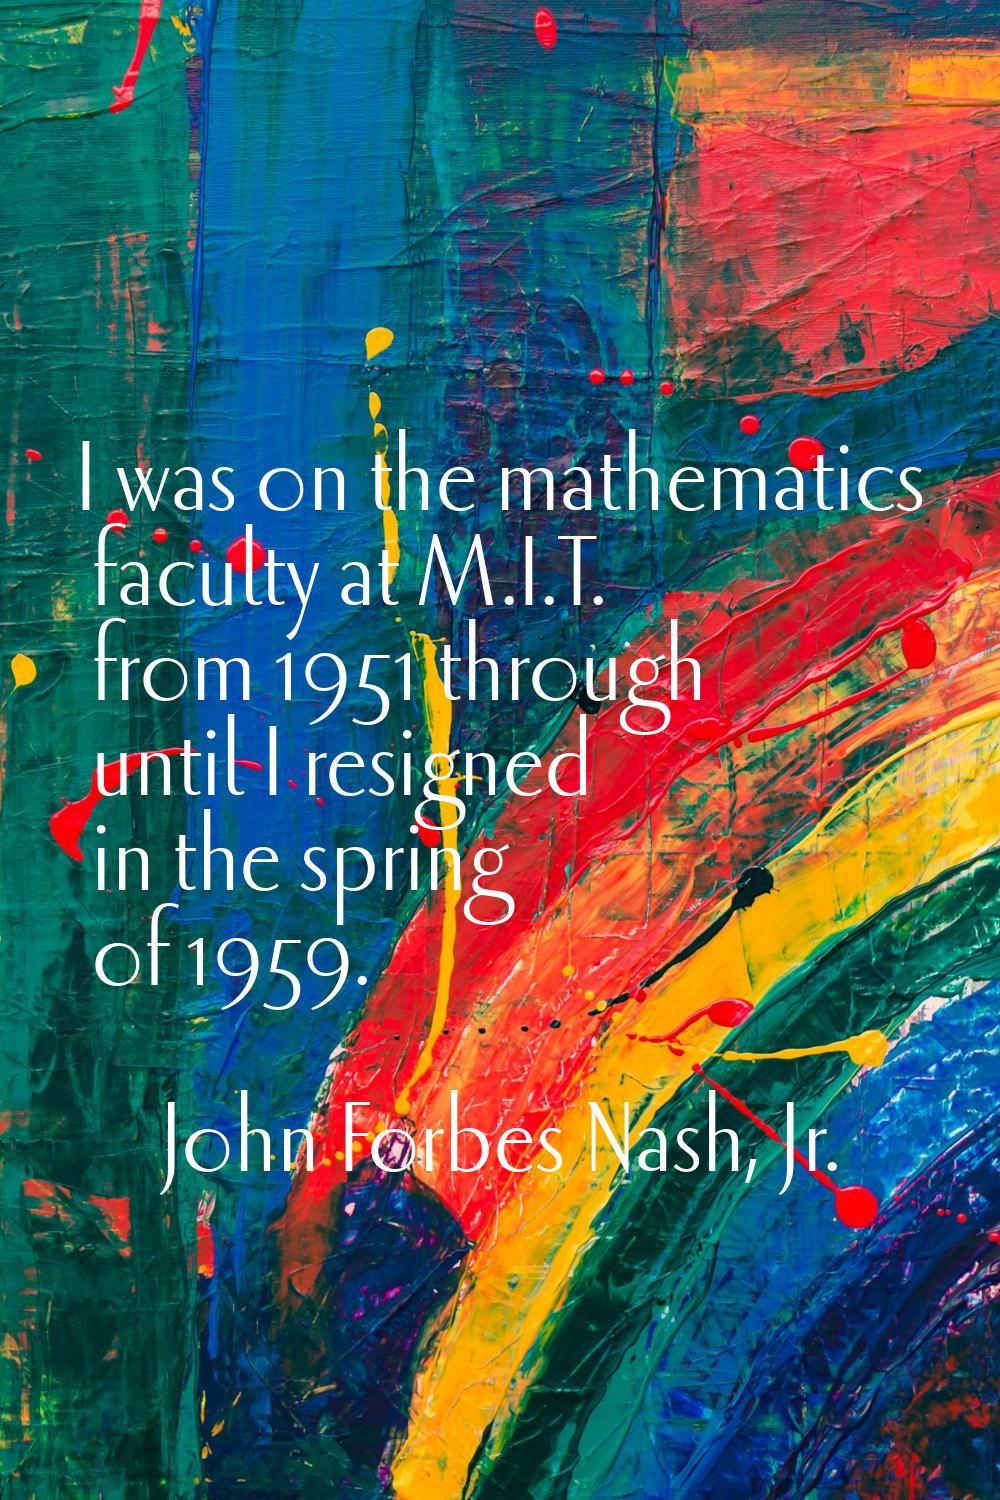 I was on the mathematics faculty at M.I.T. from 1951 through until I resigned in the spring of 1959